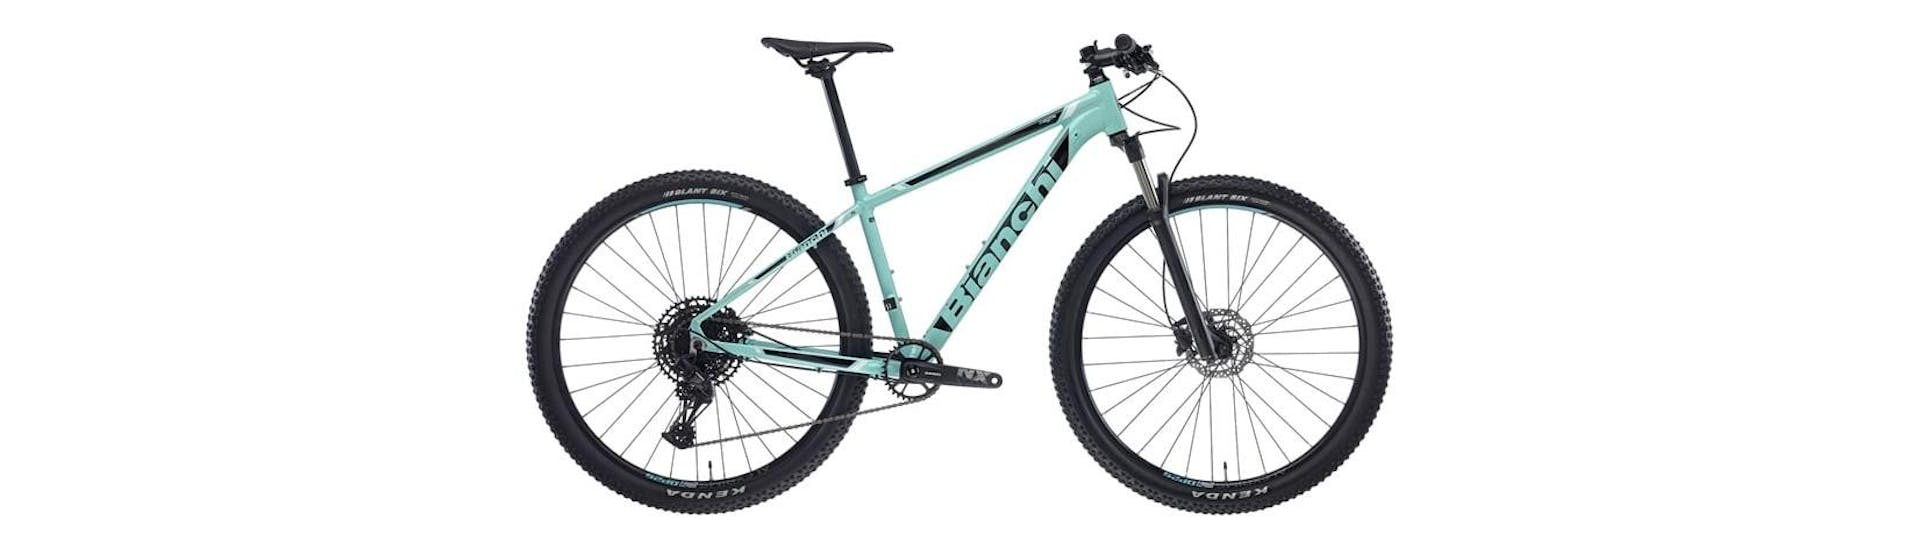 The fast mountain bike hardtail that you can hire with BikeIt! Bellagio & Varenna.